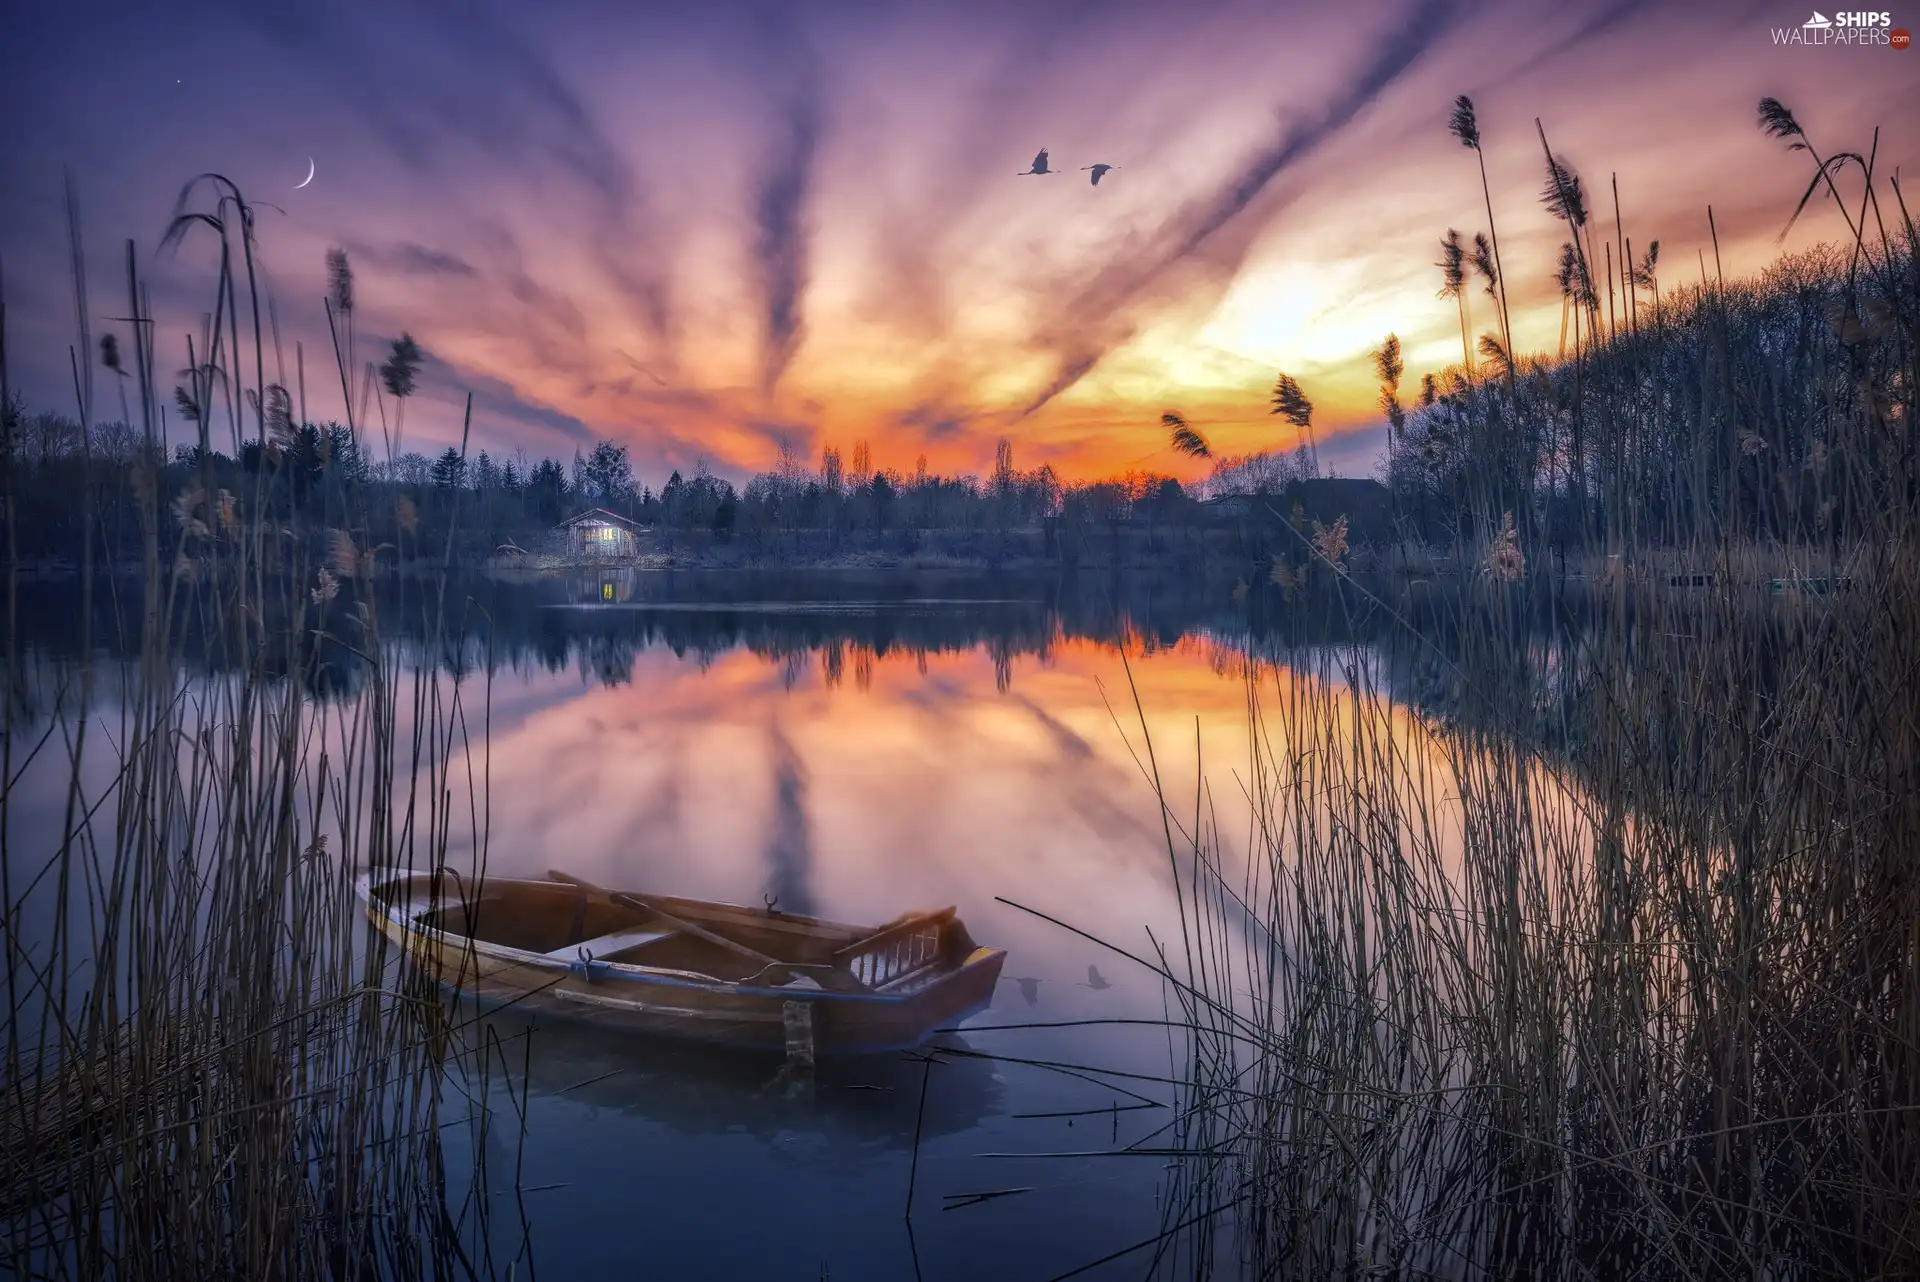 Boat, lake, birds, cane, Great Sunsets, Home, flight